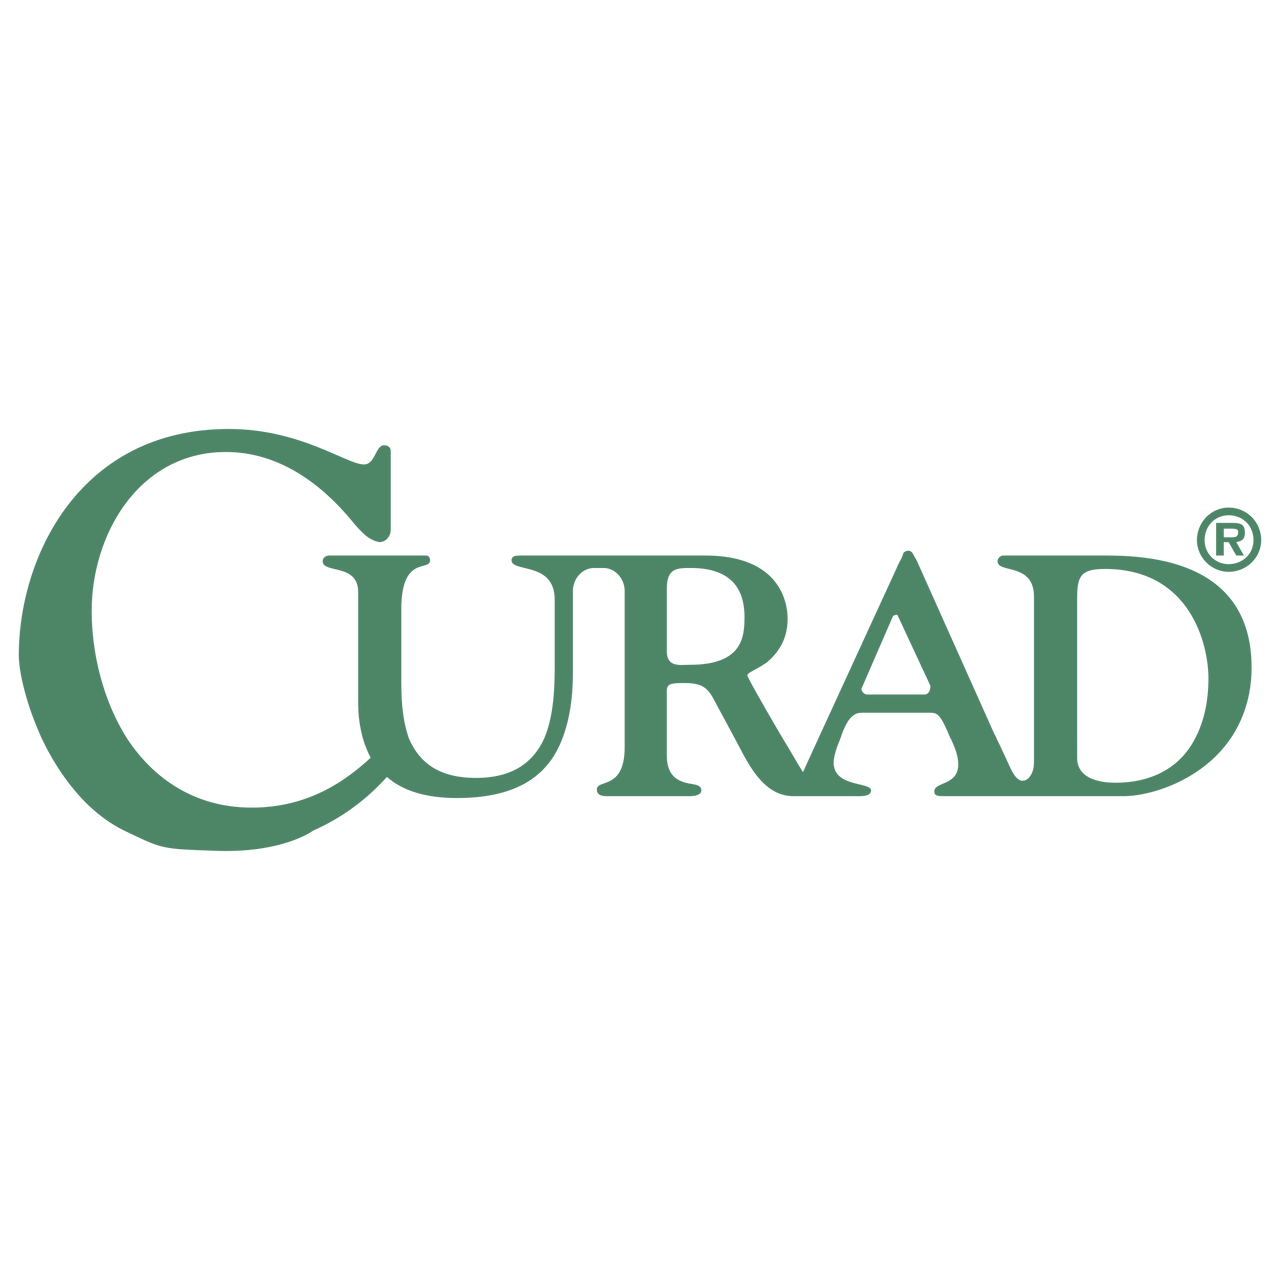 Curad - Premium Bandages & Wound Care products by Medline